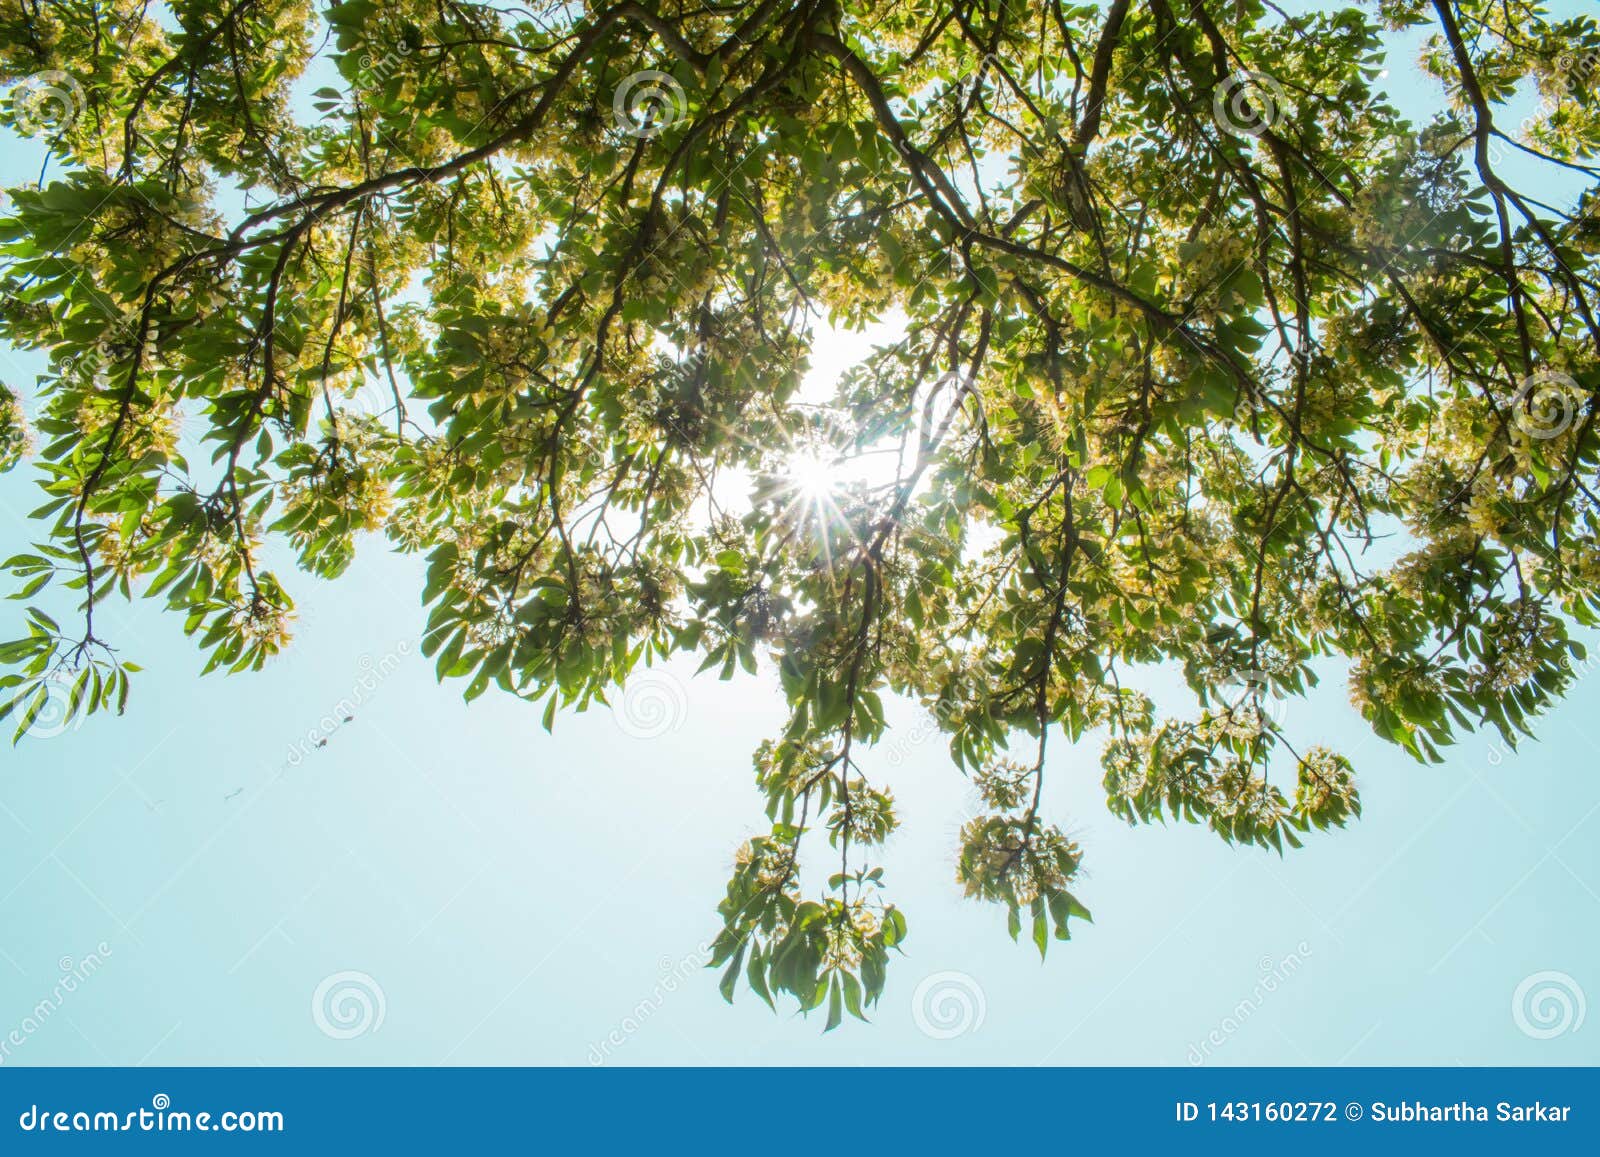 Sun Behind Branches and Leaves in a Sunny Day Stock Photo - Image of